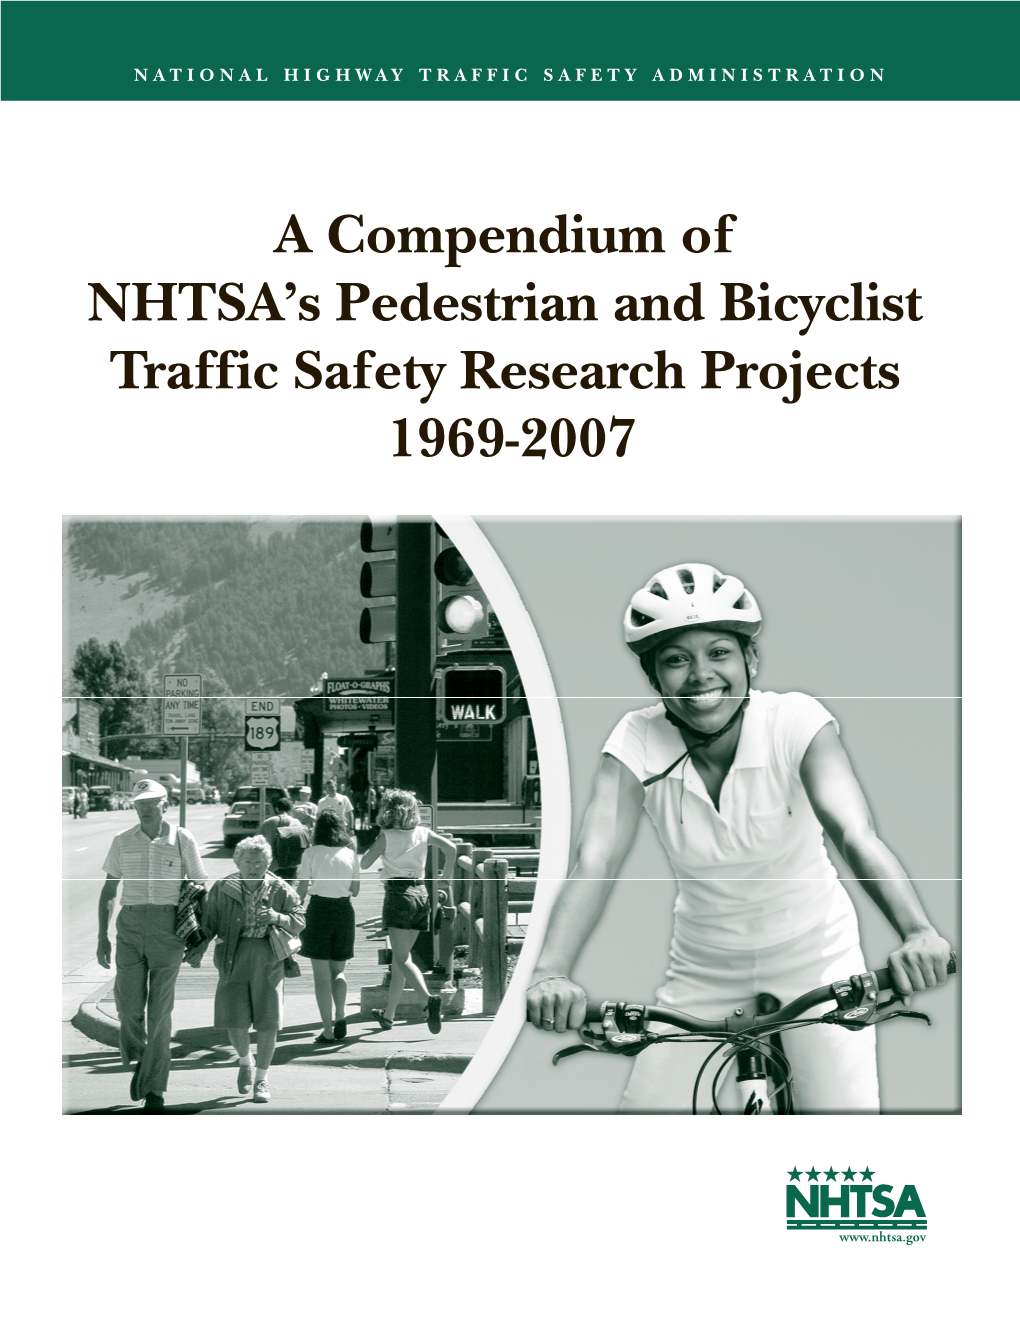 Pedestrian and Bicyclist Traffic Safety Research Projects 1969-2007